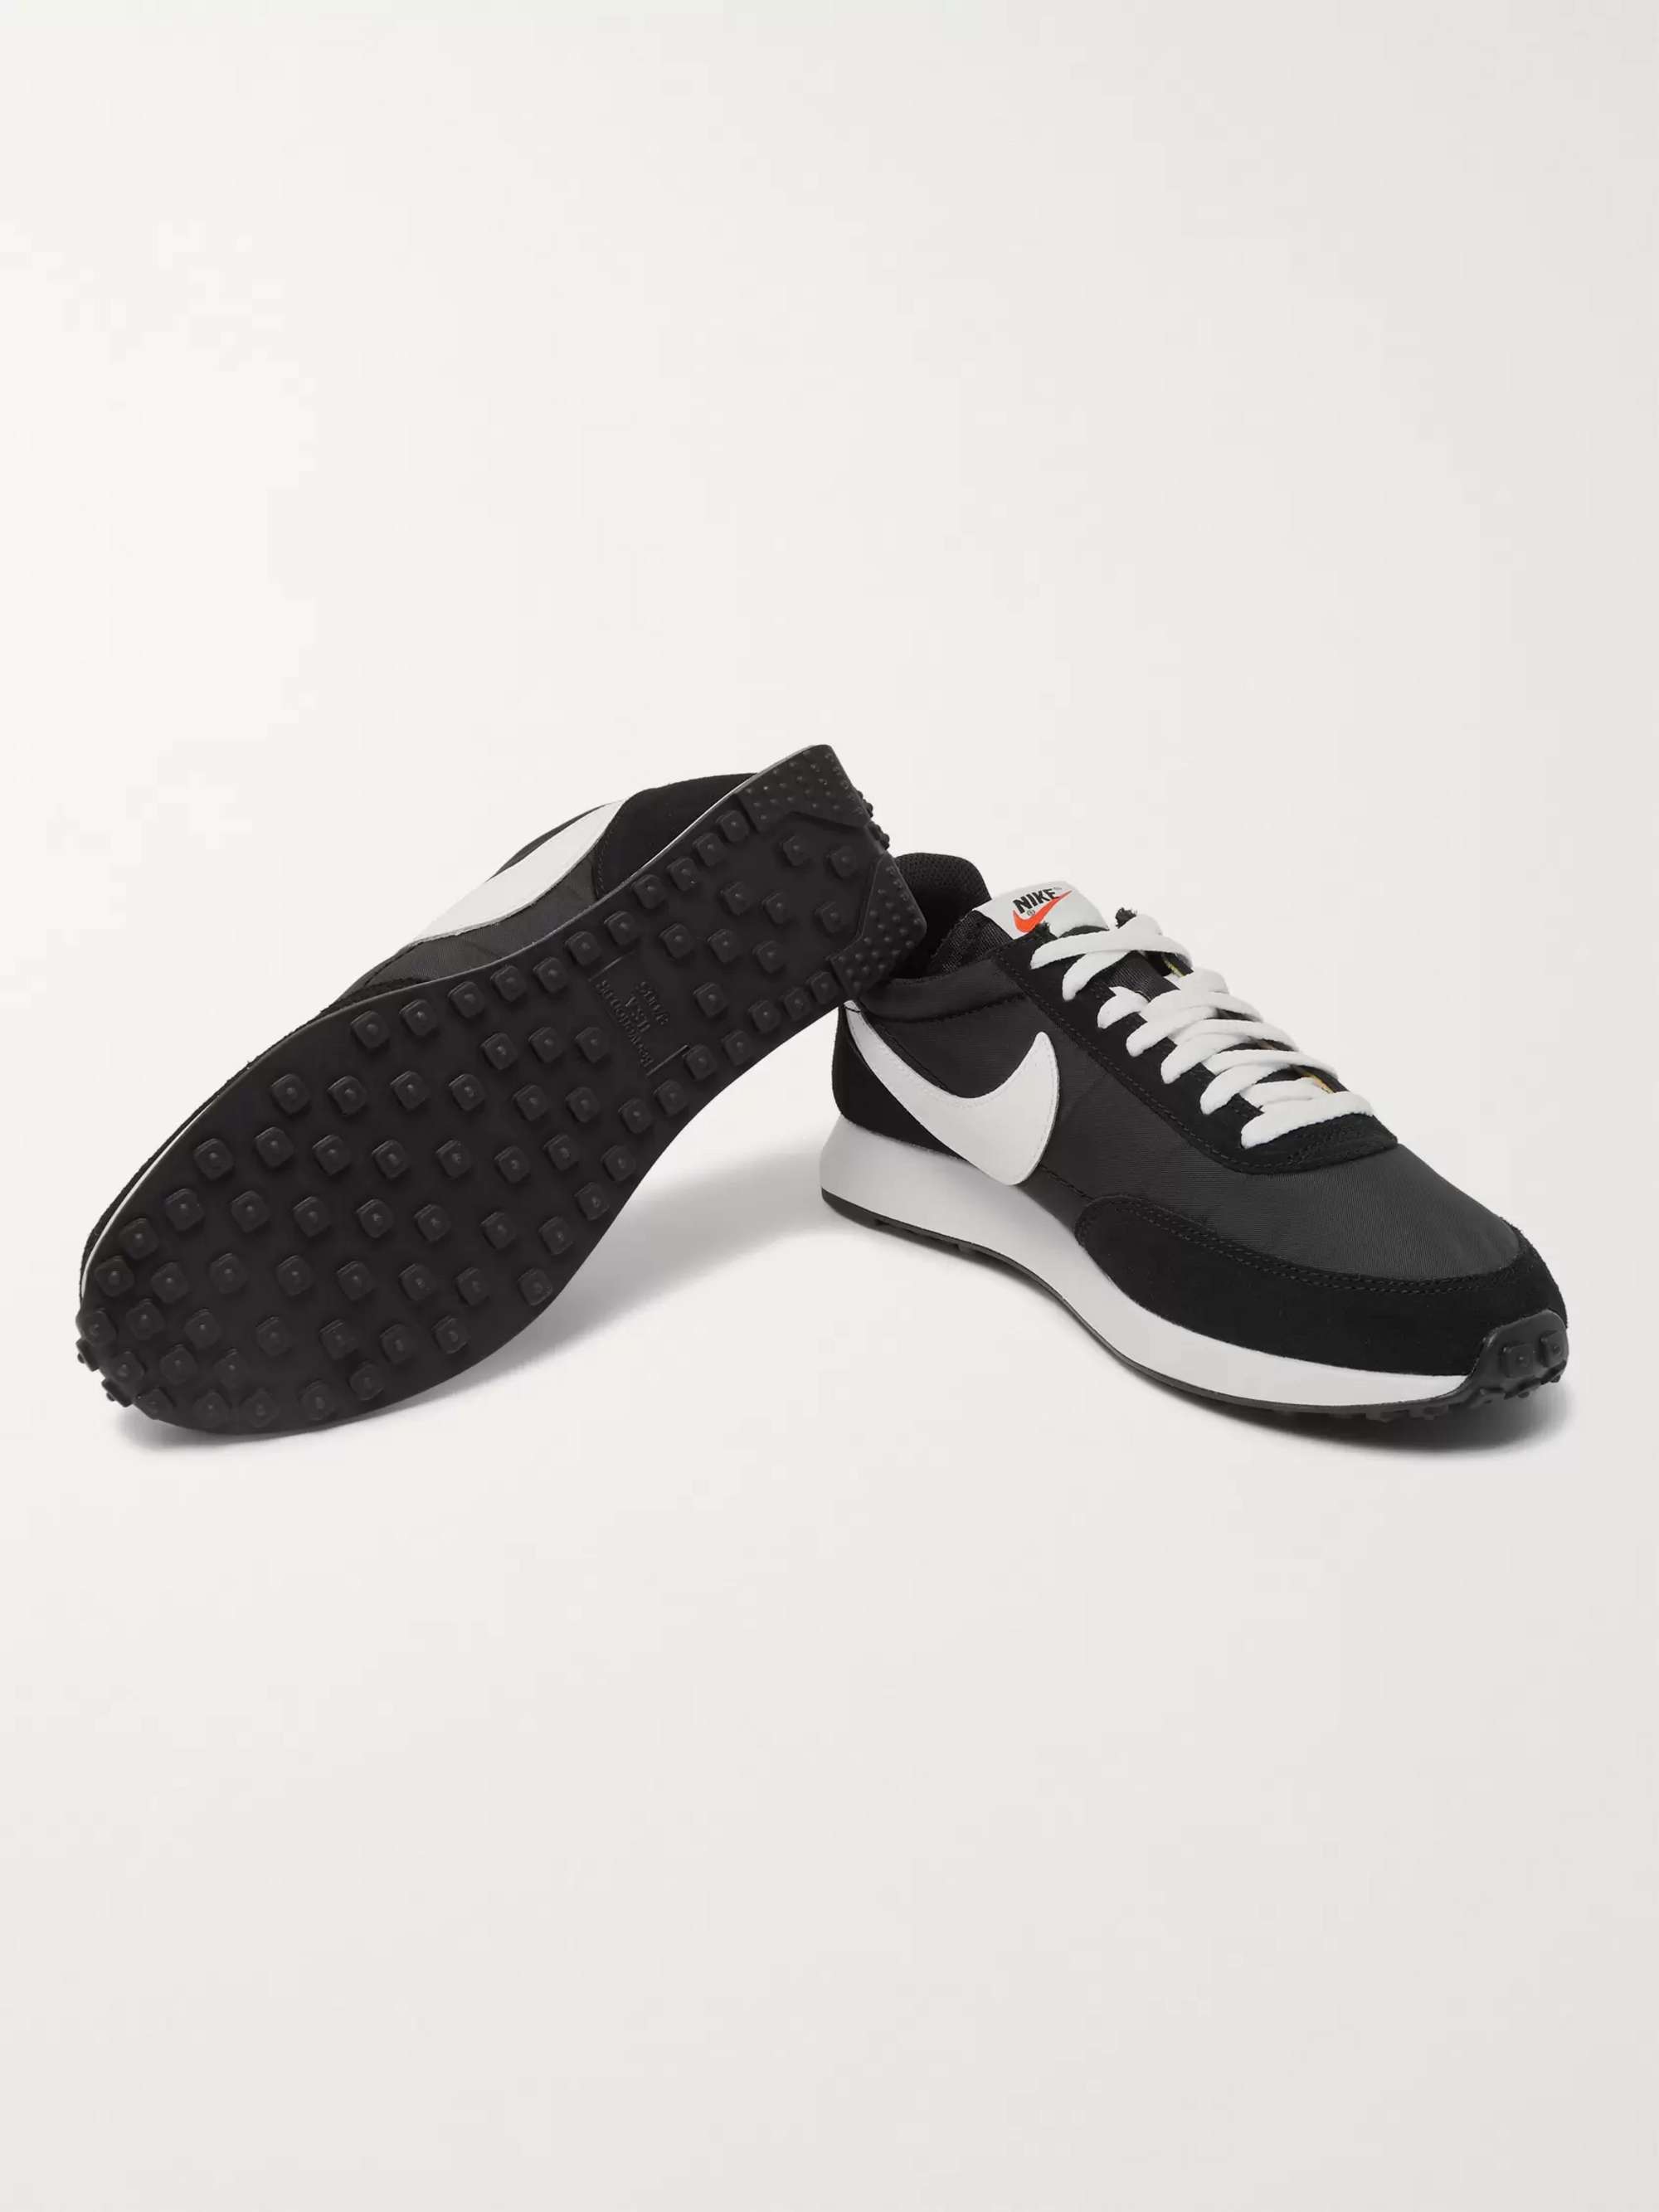 NIKE Air Tailwind 79 Shell, Suede and Leather Sneakers